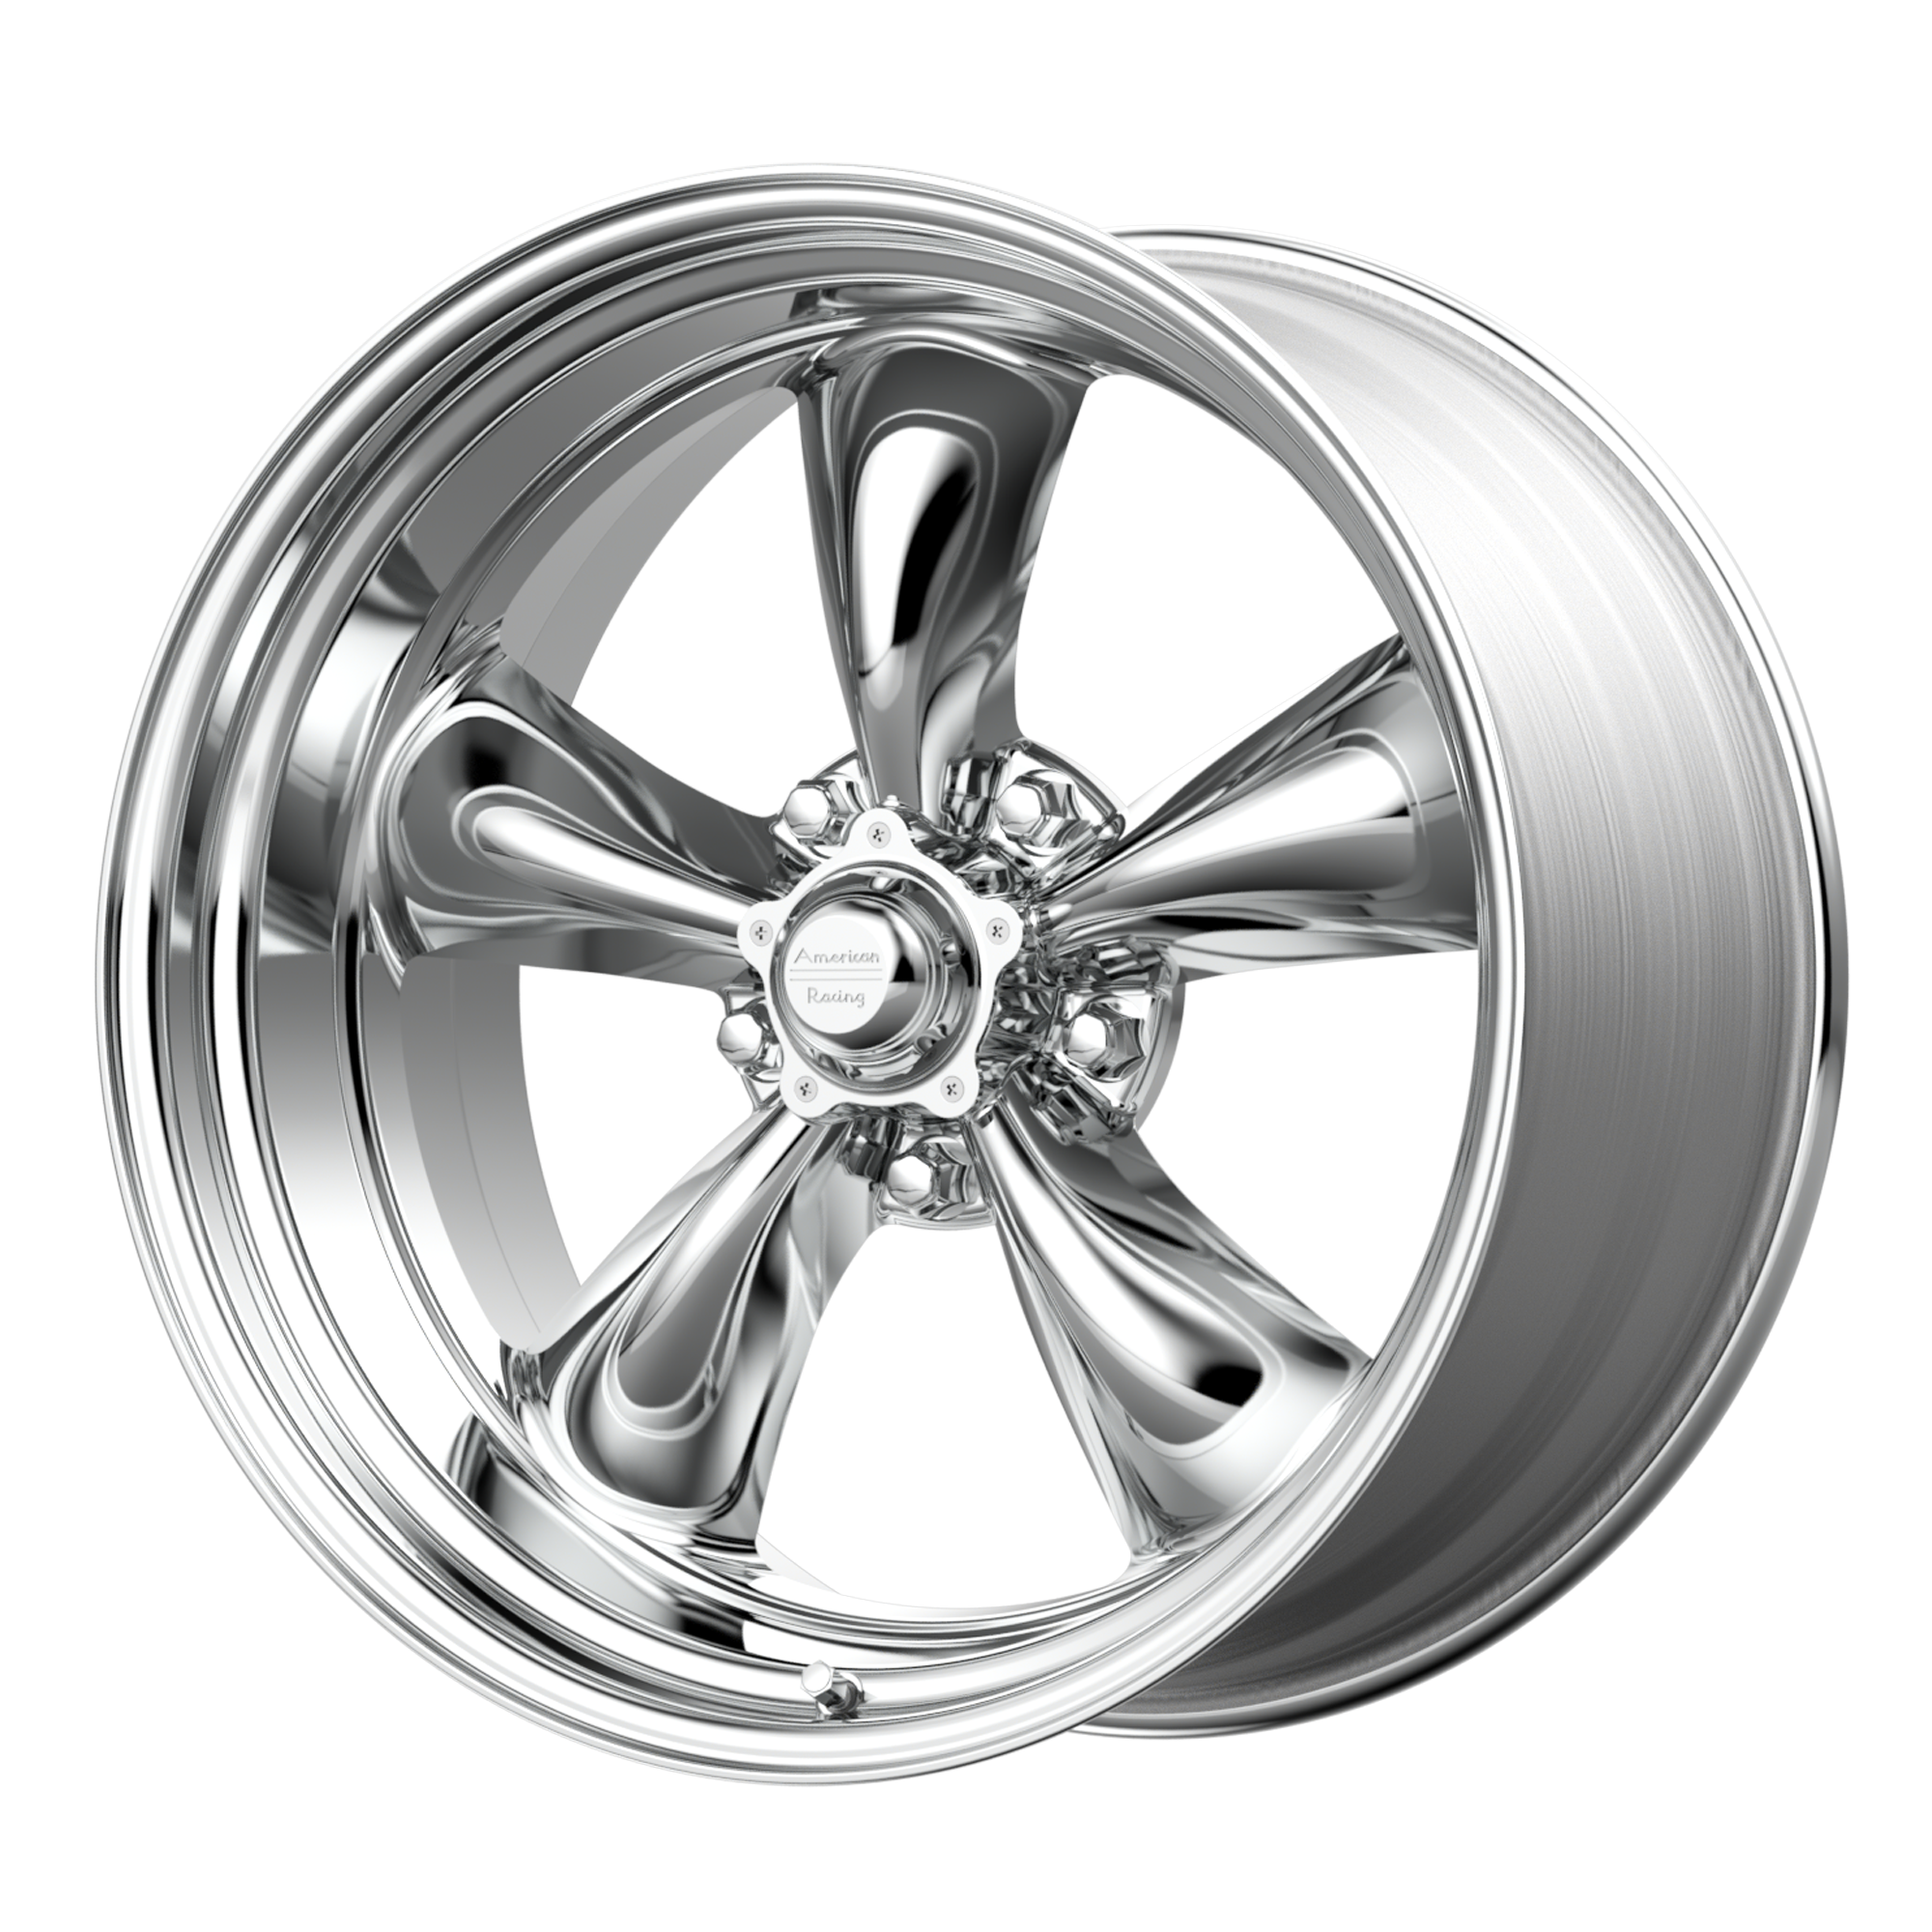 TORQ THRUST II 1 PC 15x6 5x120.65 POLISHED (-6 mm) - Tires and Engine Performance